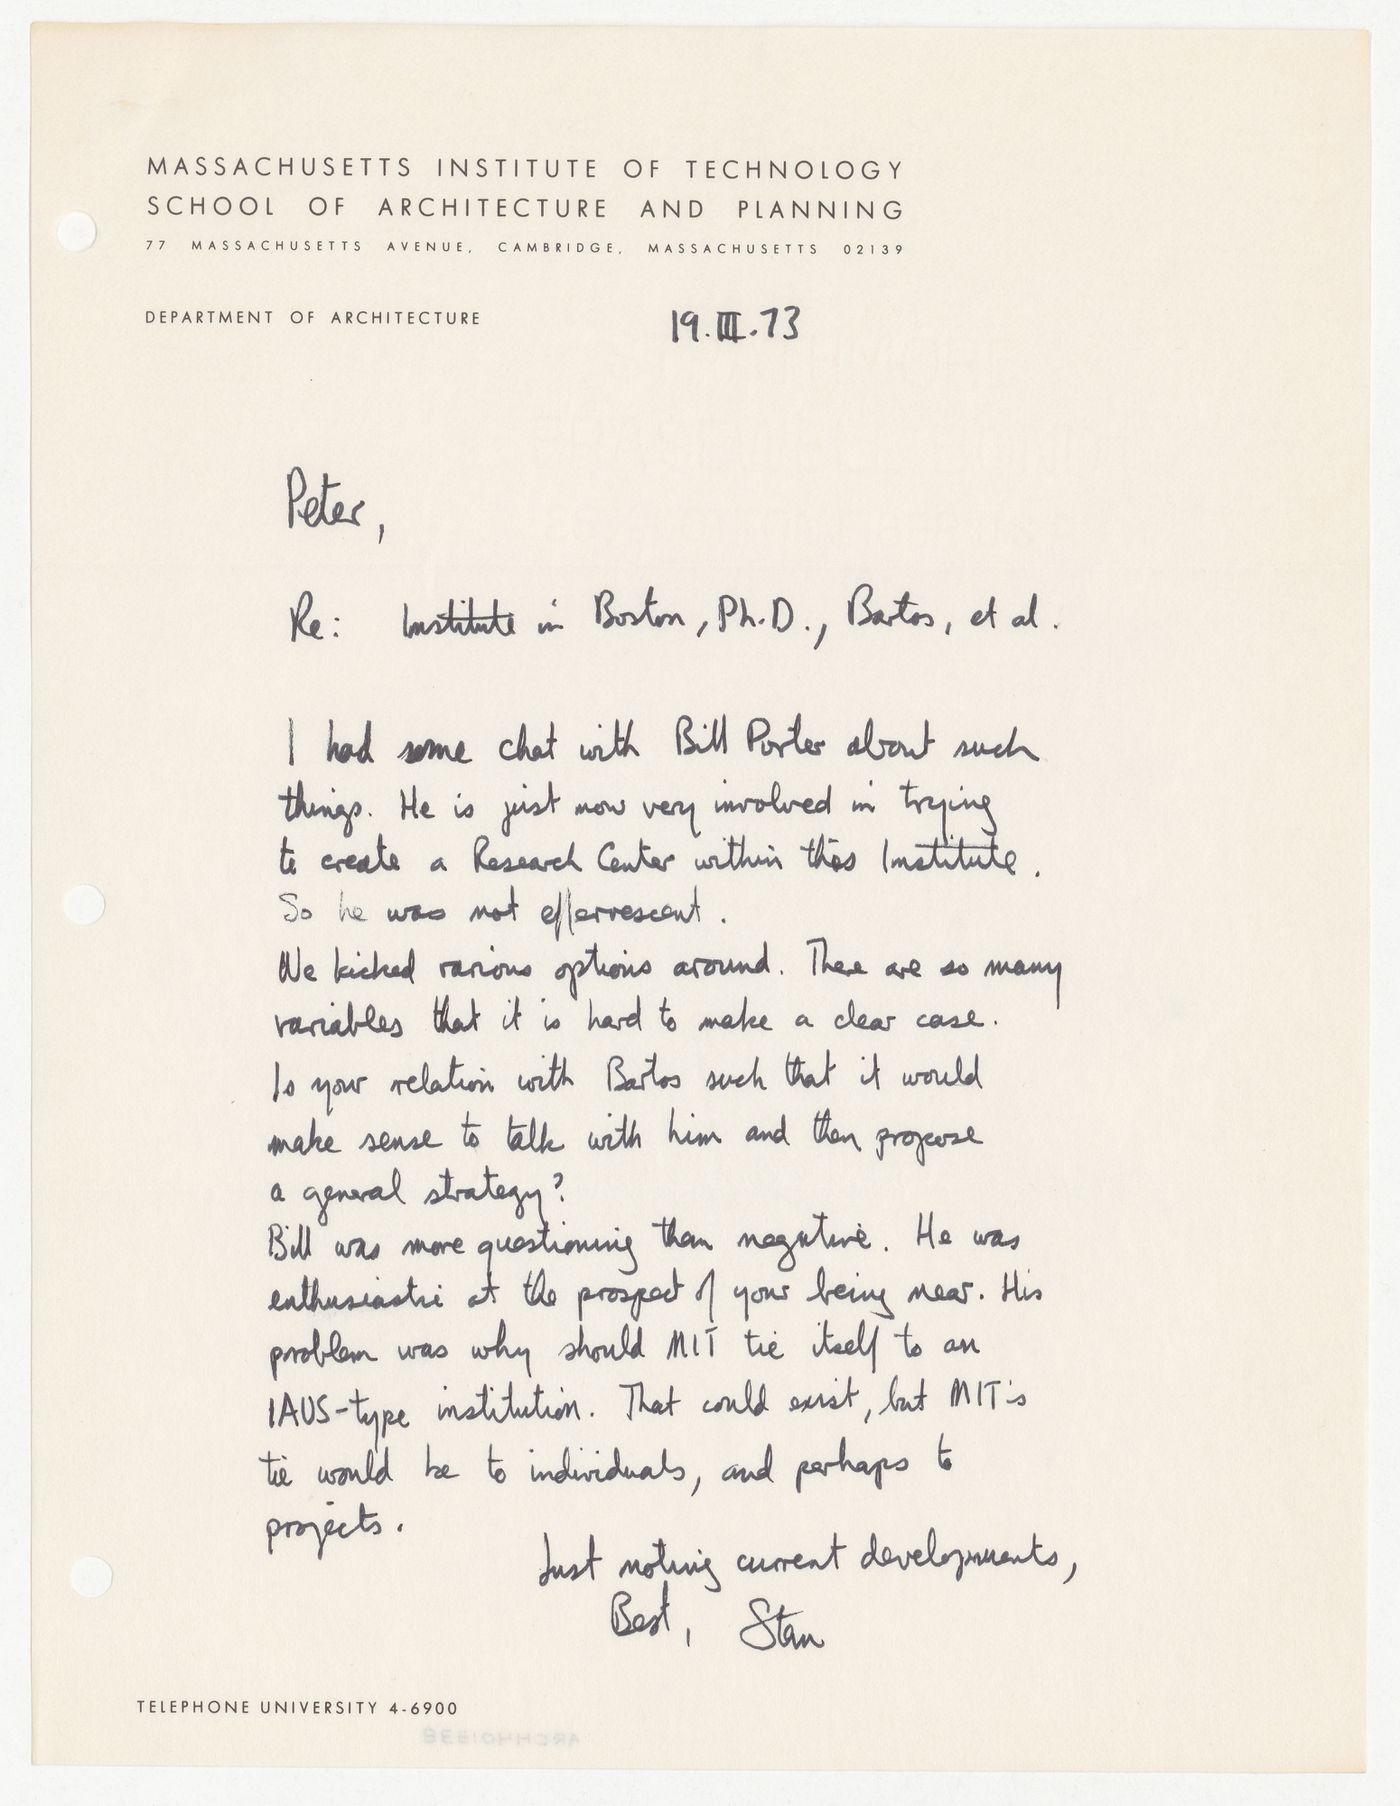 Letter from Stanford Anderson to Peter D. Eisenman about collaboration between Massachusetts Institute of Technology (MIT) and IAUS